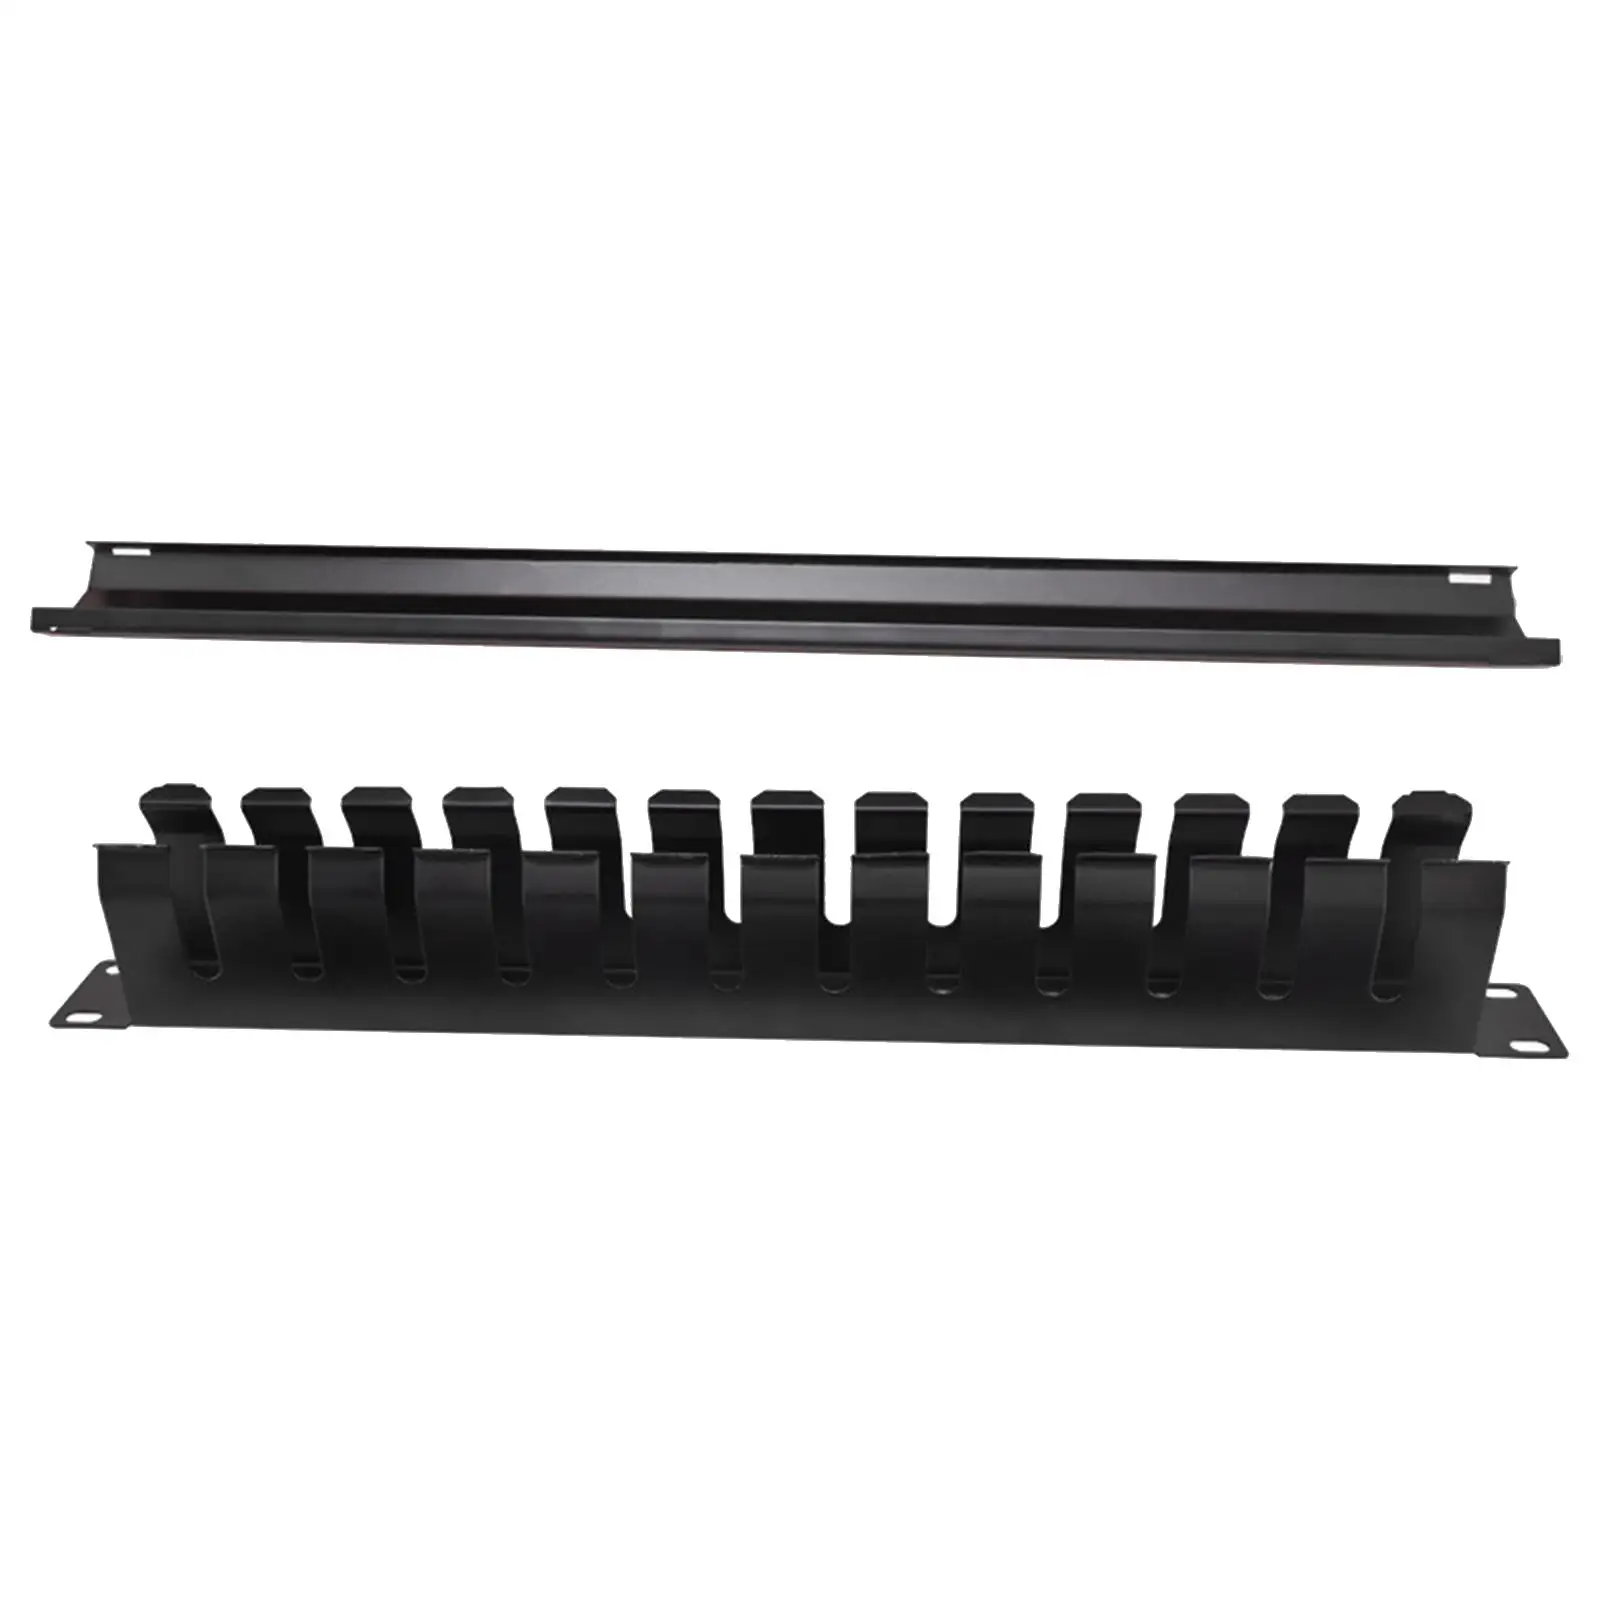 Cable Server Rack Desk Accessories Desk Socket Holder Desk Cable Tray with Panel Cover 12 Way Cable Organizer for 1U 19 inch